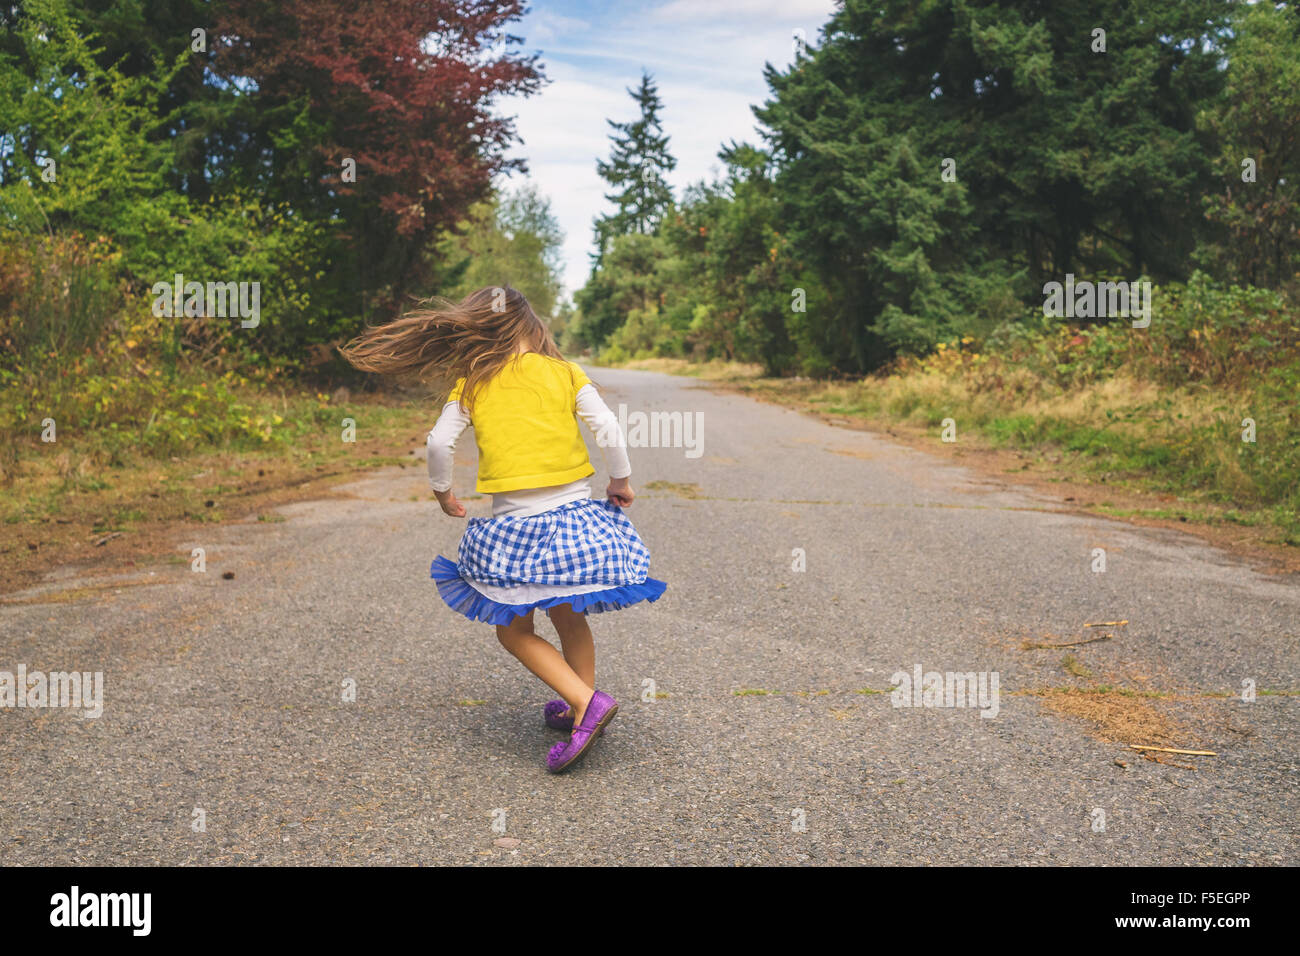 Girl spinning around on a road Stock Photo